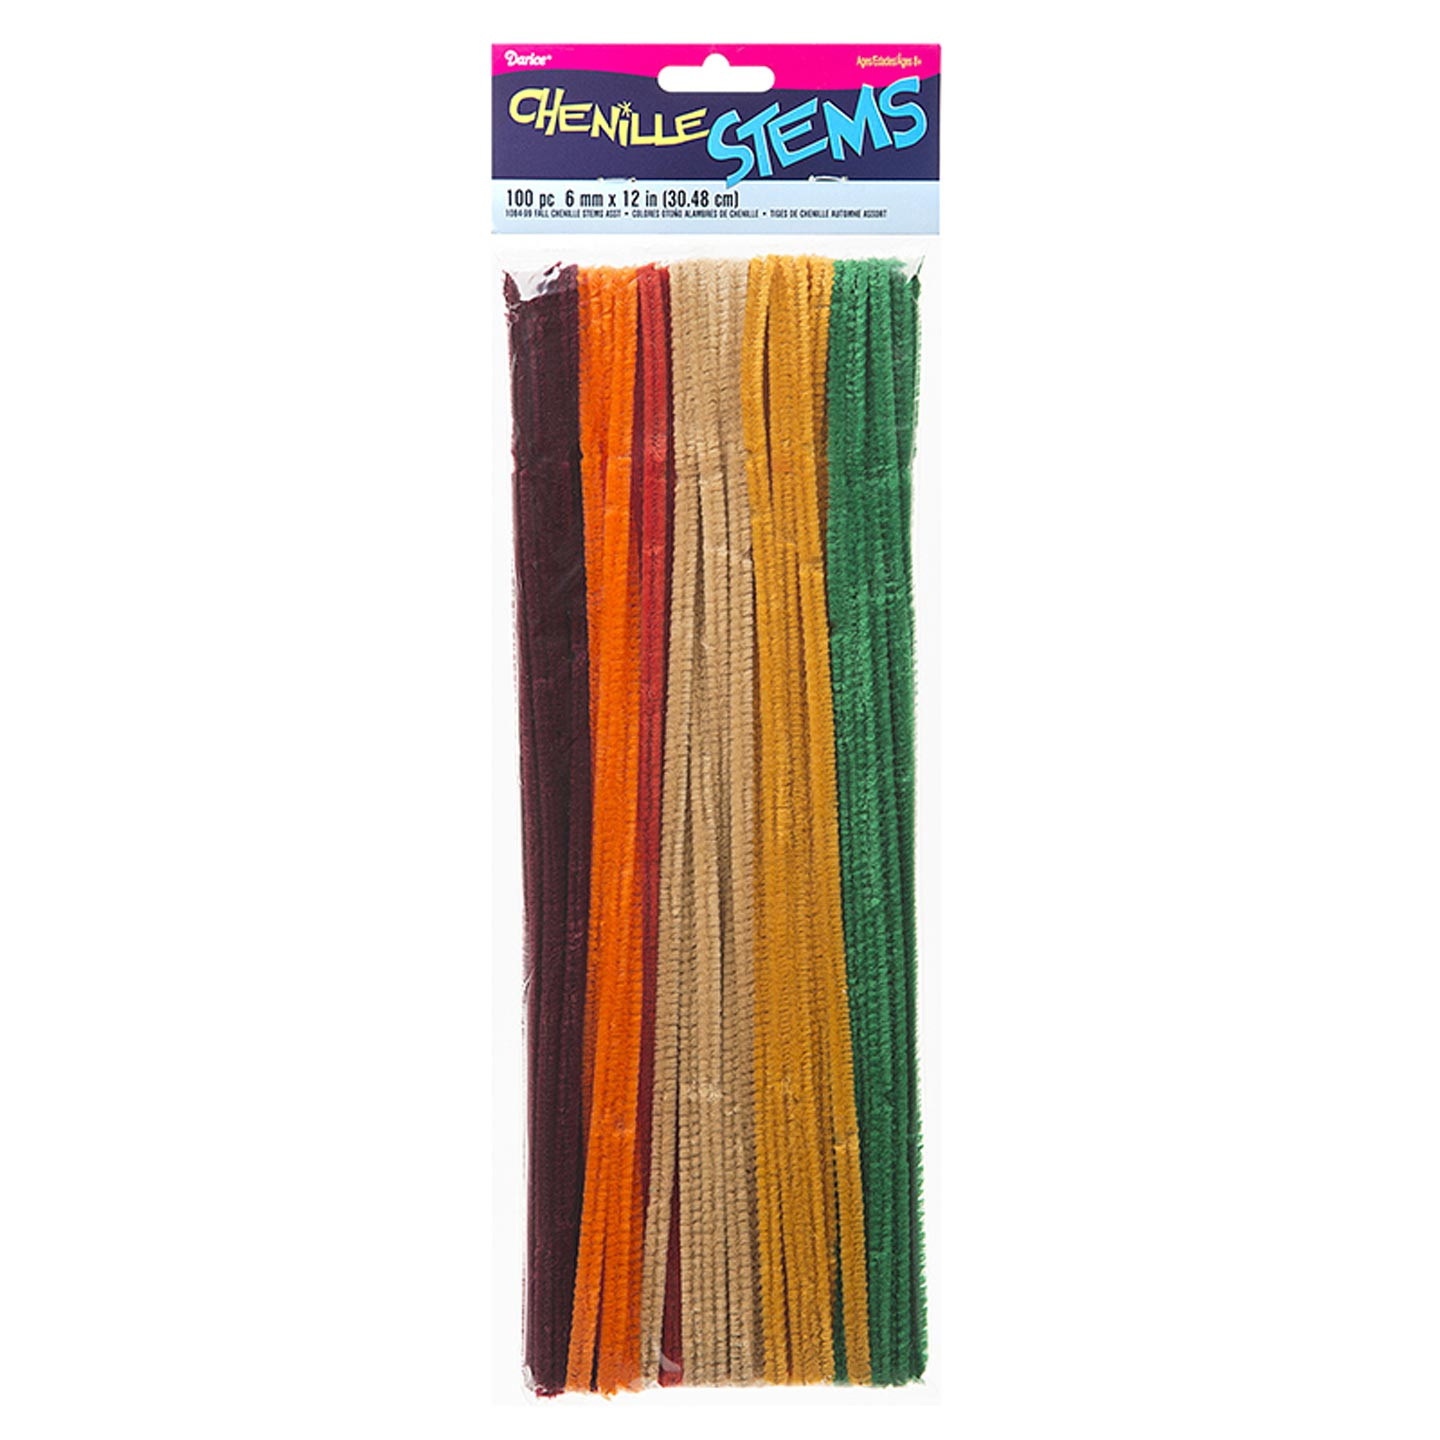 100Pcs Pipe Cleaners Bulk Craft Supplies Brown Chenille Stems 6Mm